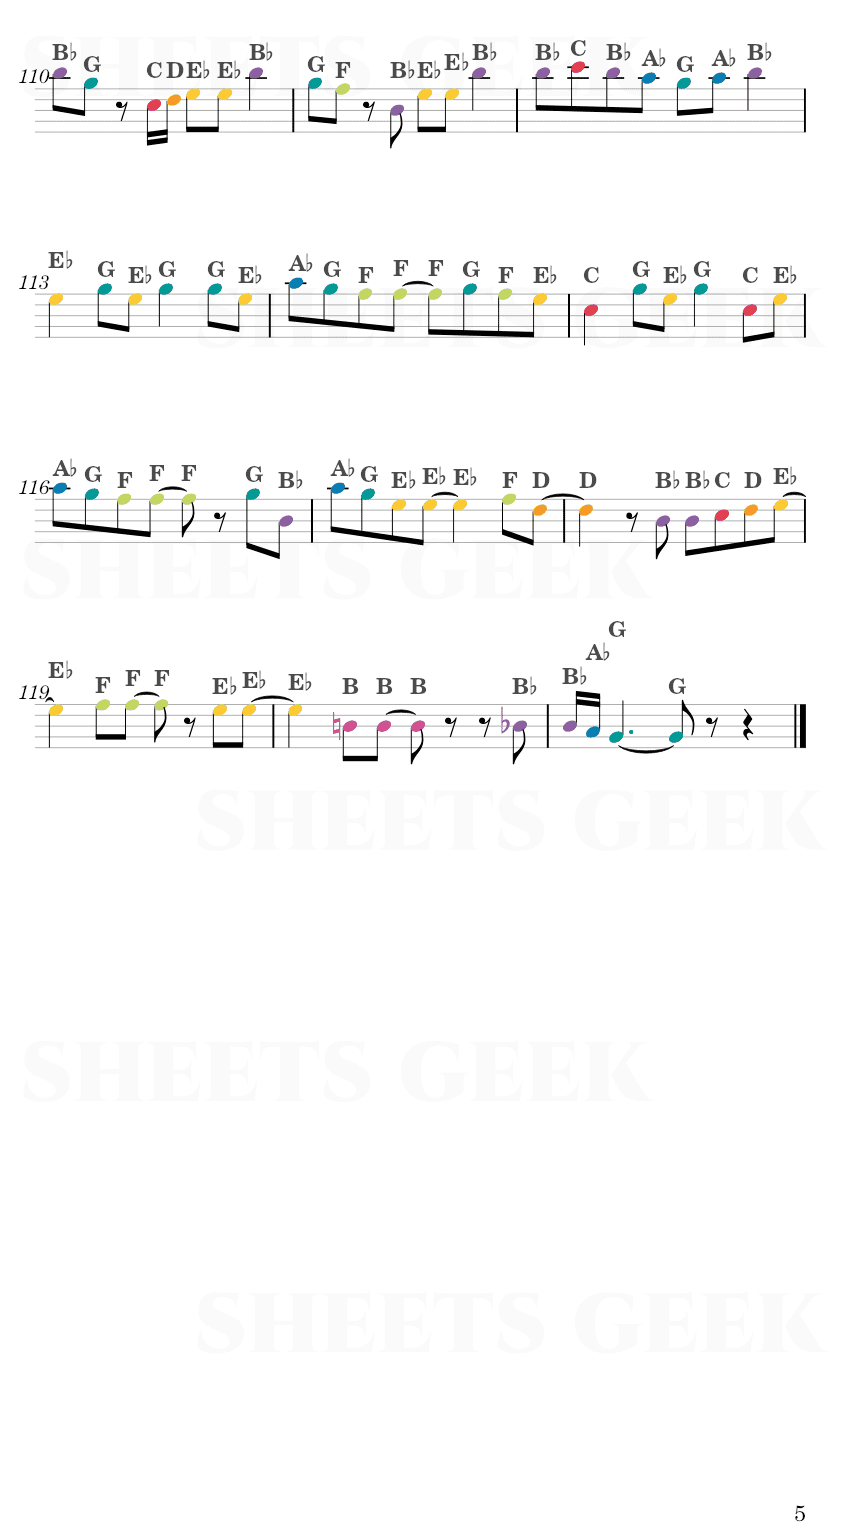 Spring Day - BTS Easy Sheets Music Free for piano, keyboard, flute, violin, sax, celllo 5